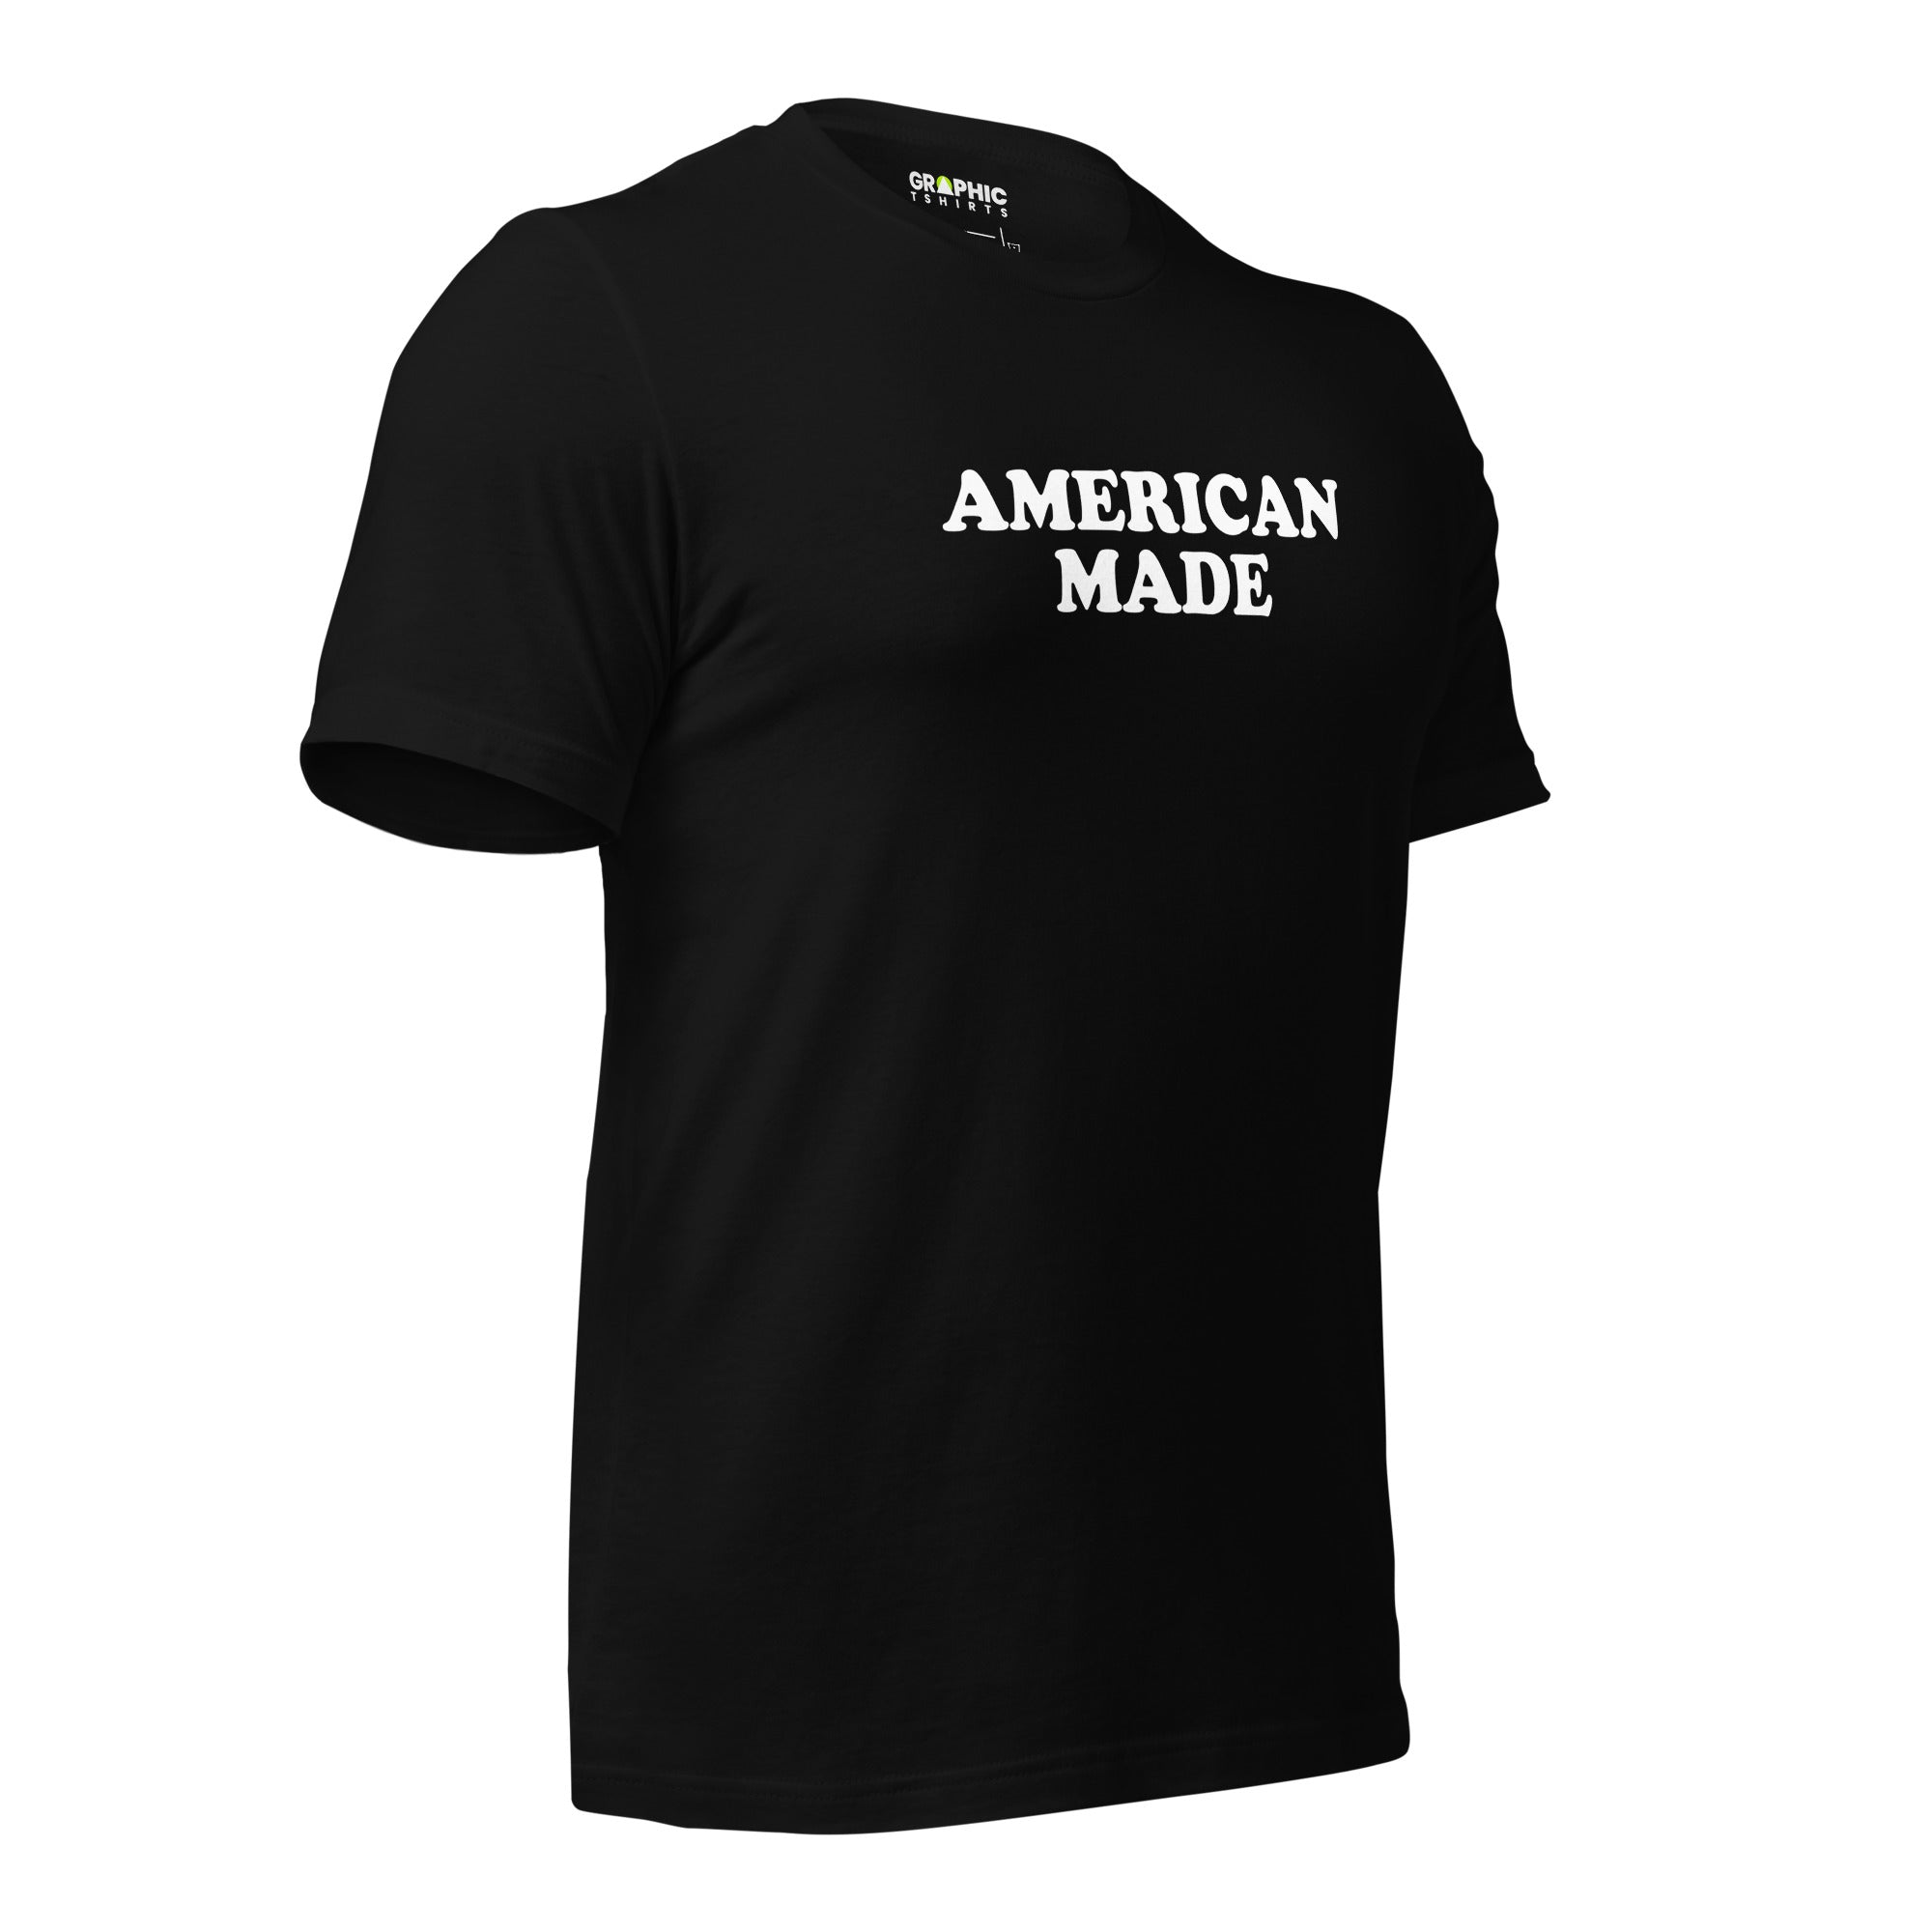 Men's Crew Neck T-Shirt - American Made - GRAPHIC T-SHIRTS